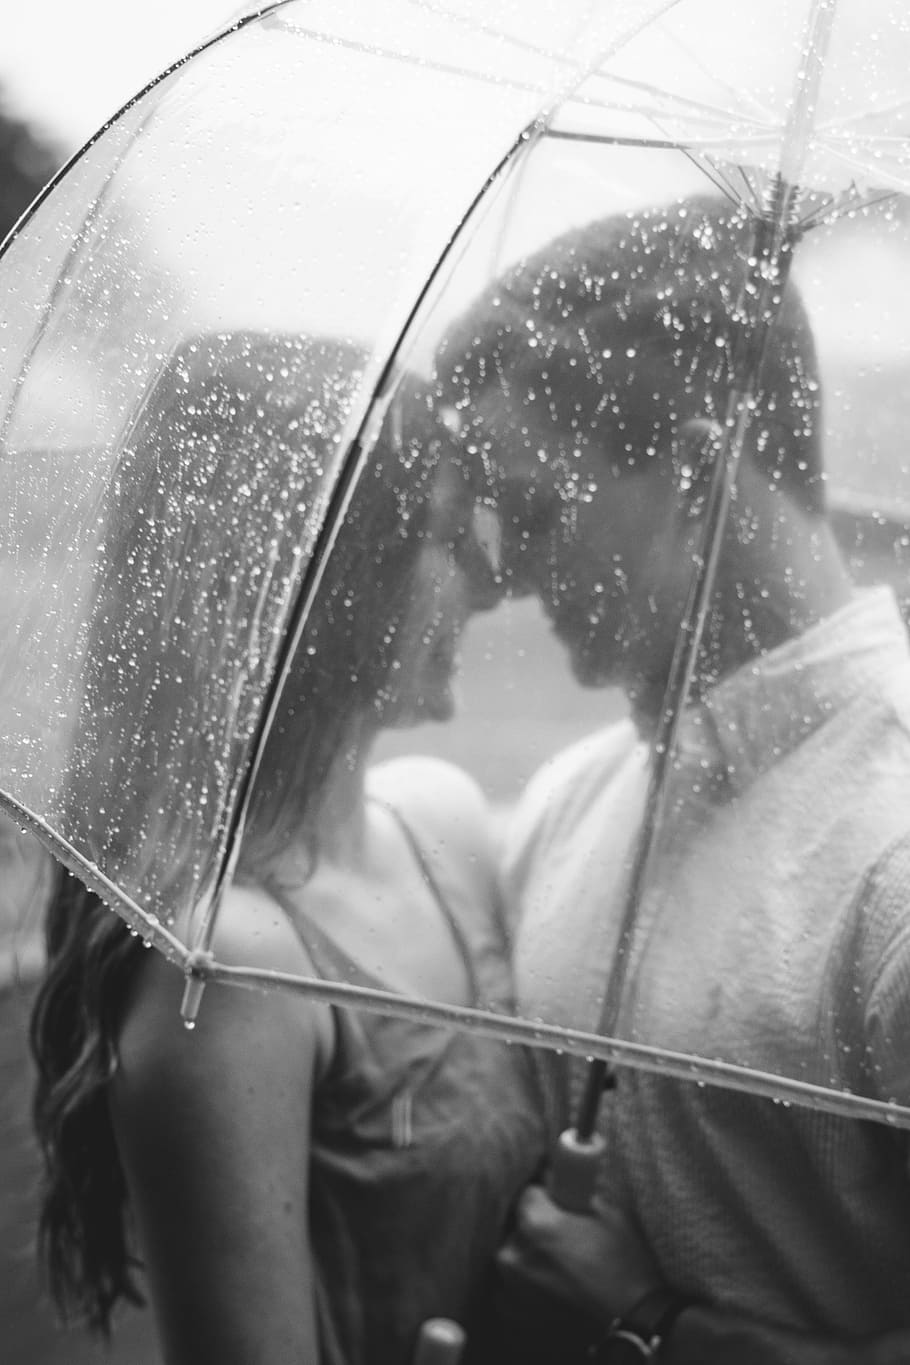 man, woman grayscale photography, people, couple, woman, young, happy, together, underneath, umbrella